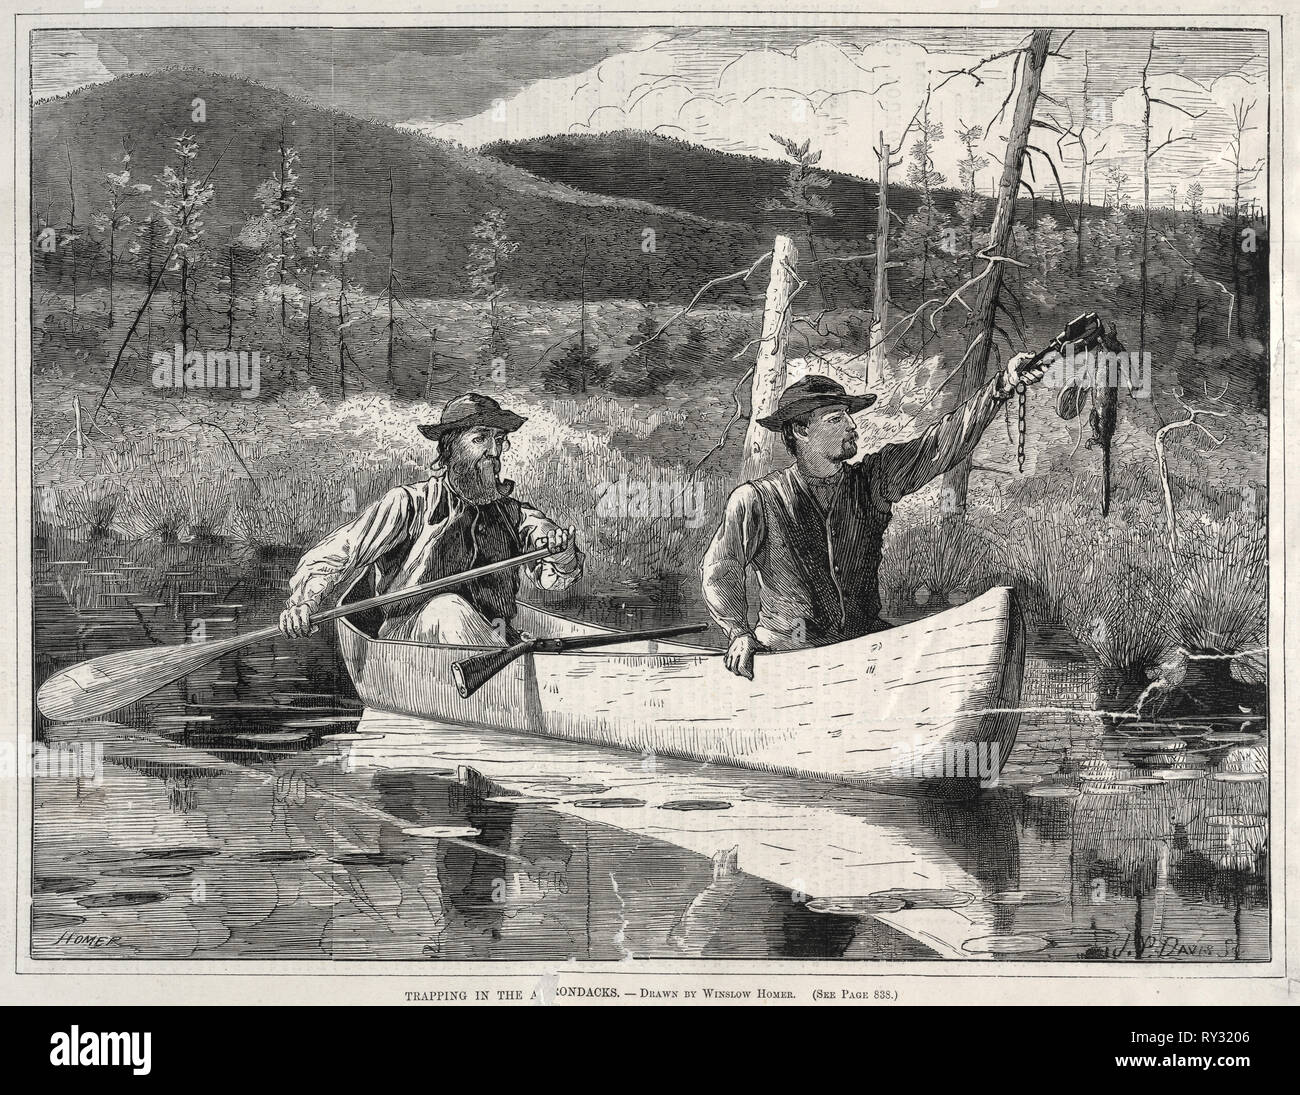 Trapping in den Adirondacks, 1870. Winslow Homer (American, 1836-1910). Holzstich Stockfoto